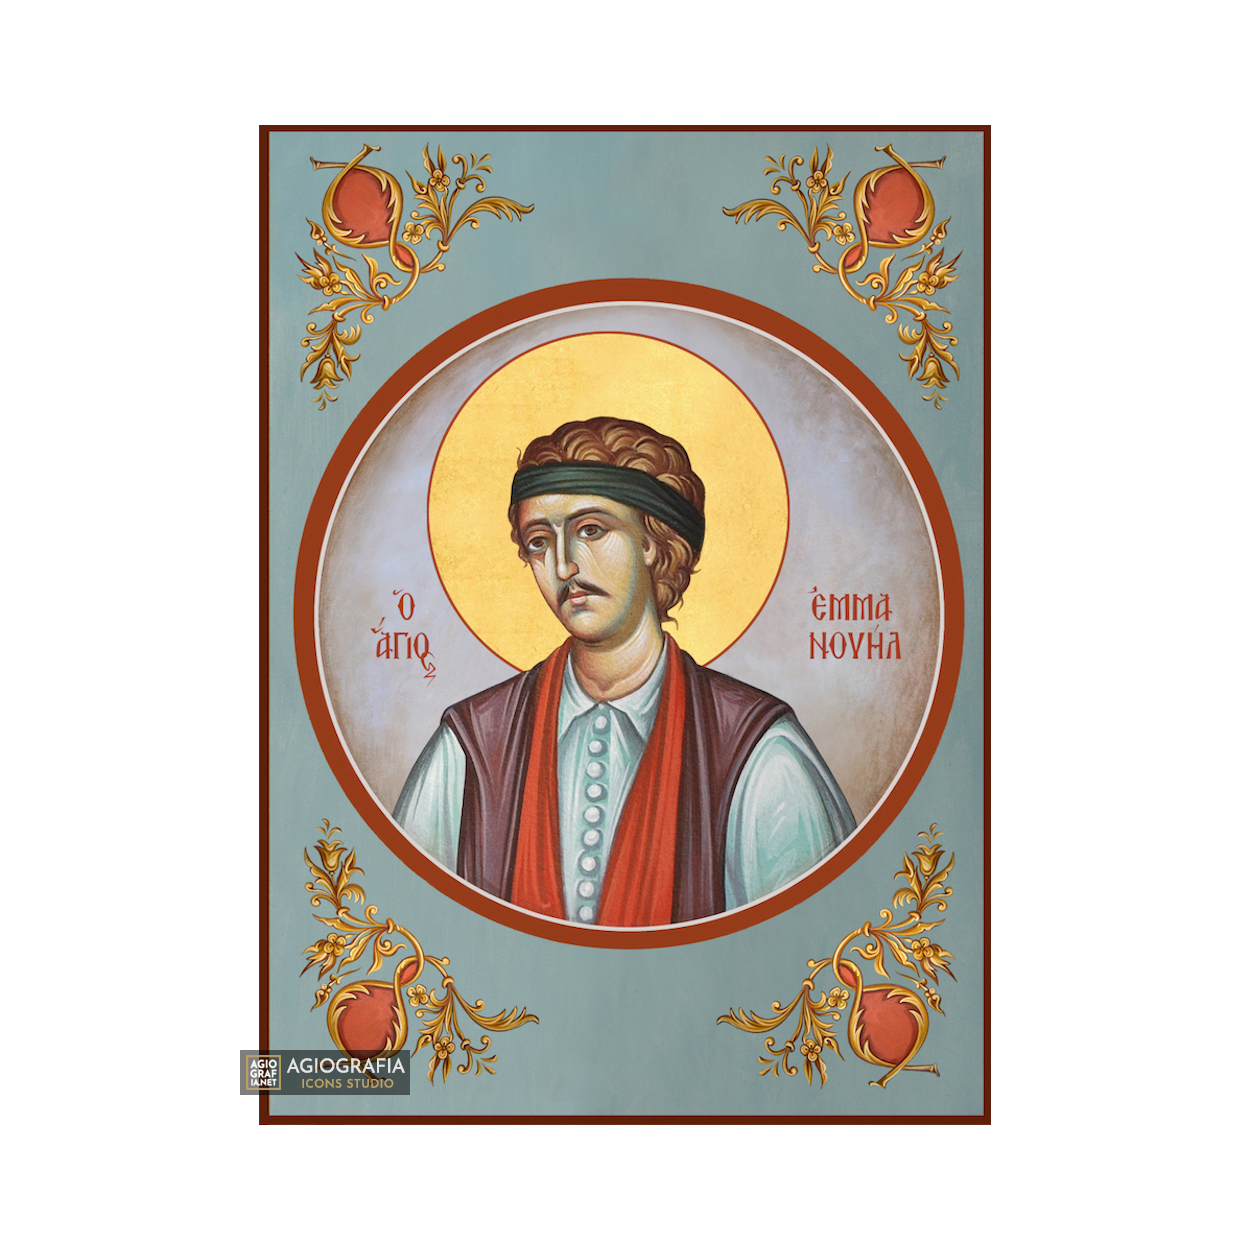 St Emmanuel Christian Orthodox Icon with Blue Background